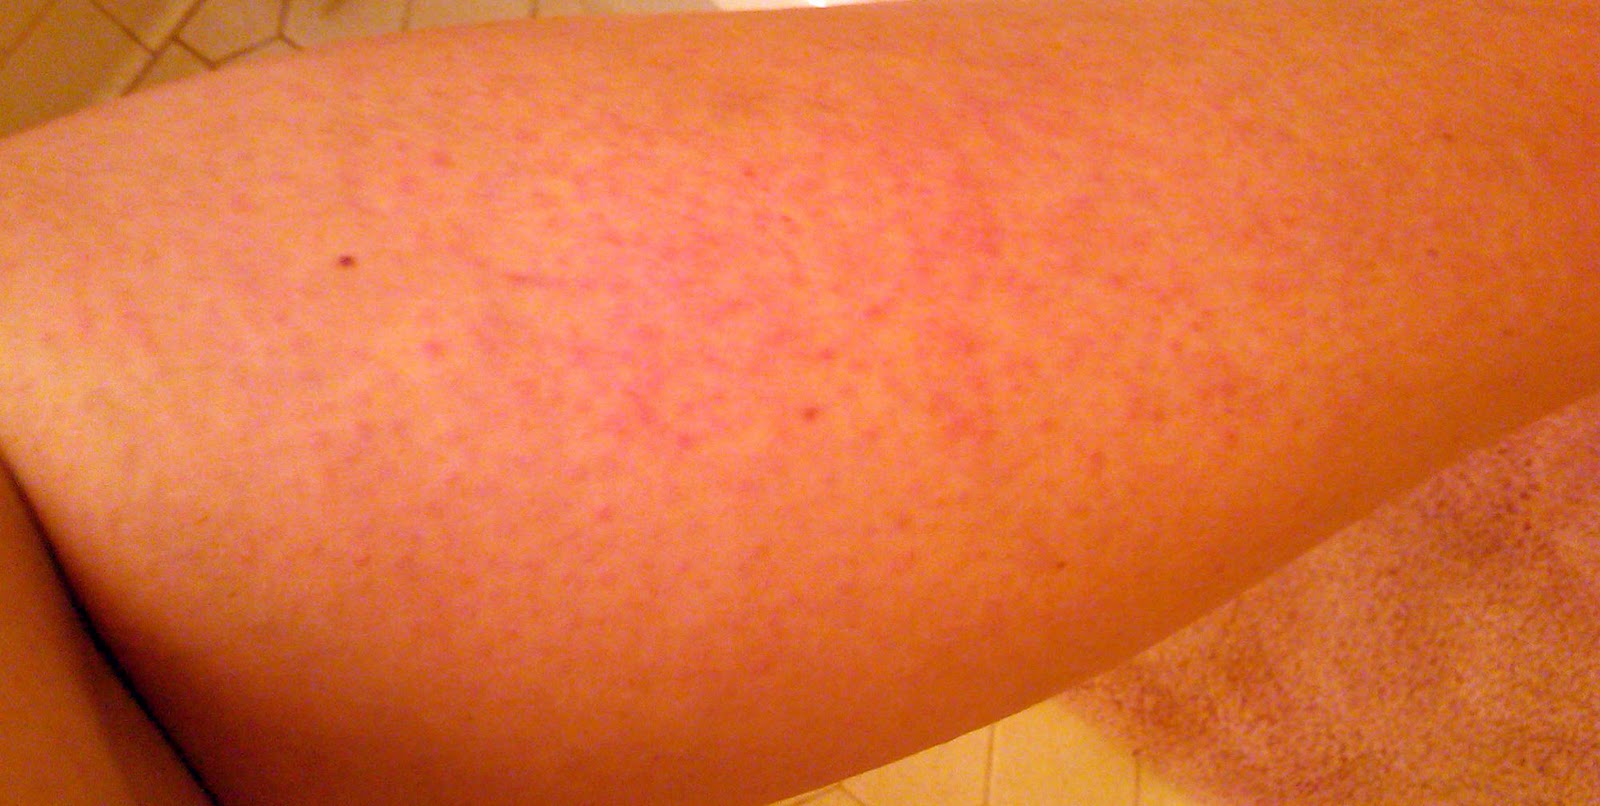 Swollen Legs With Red Mass 66